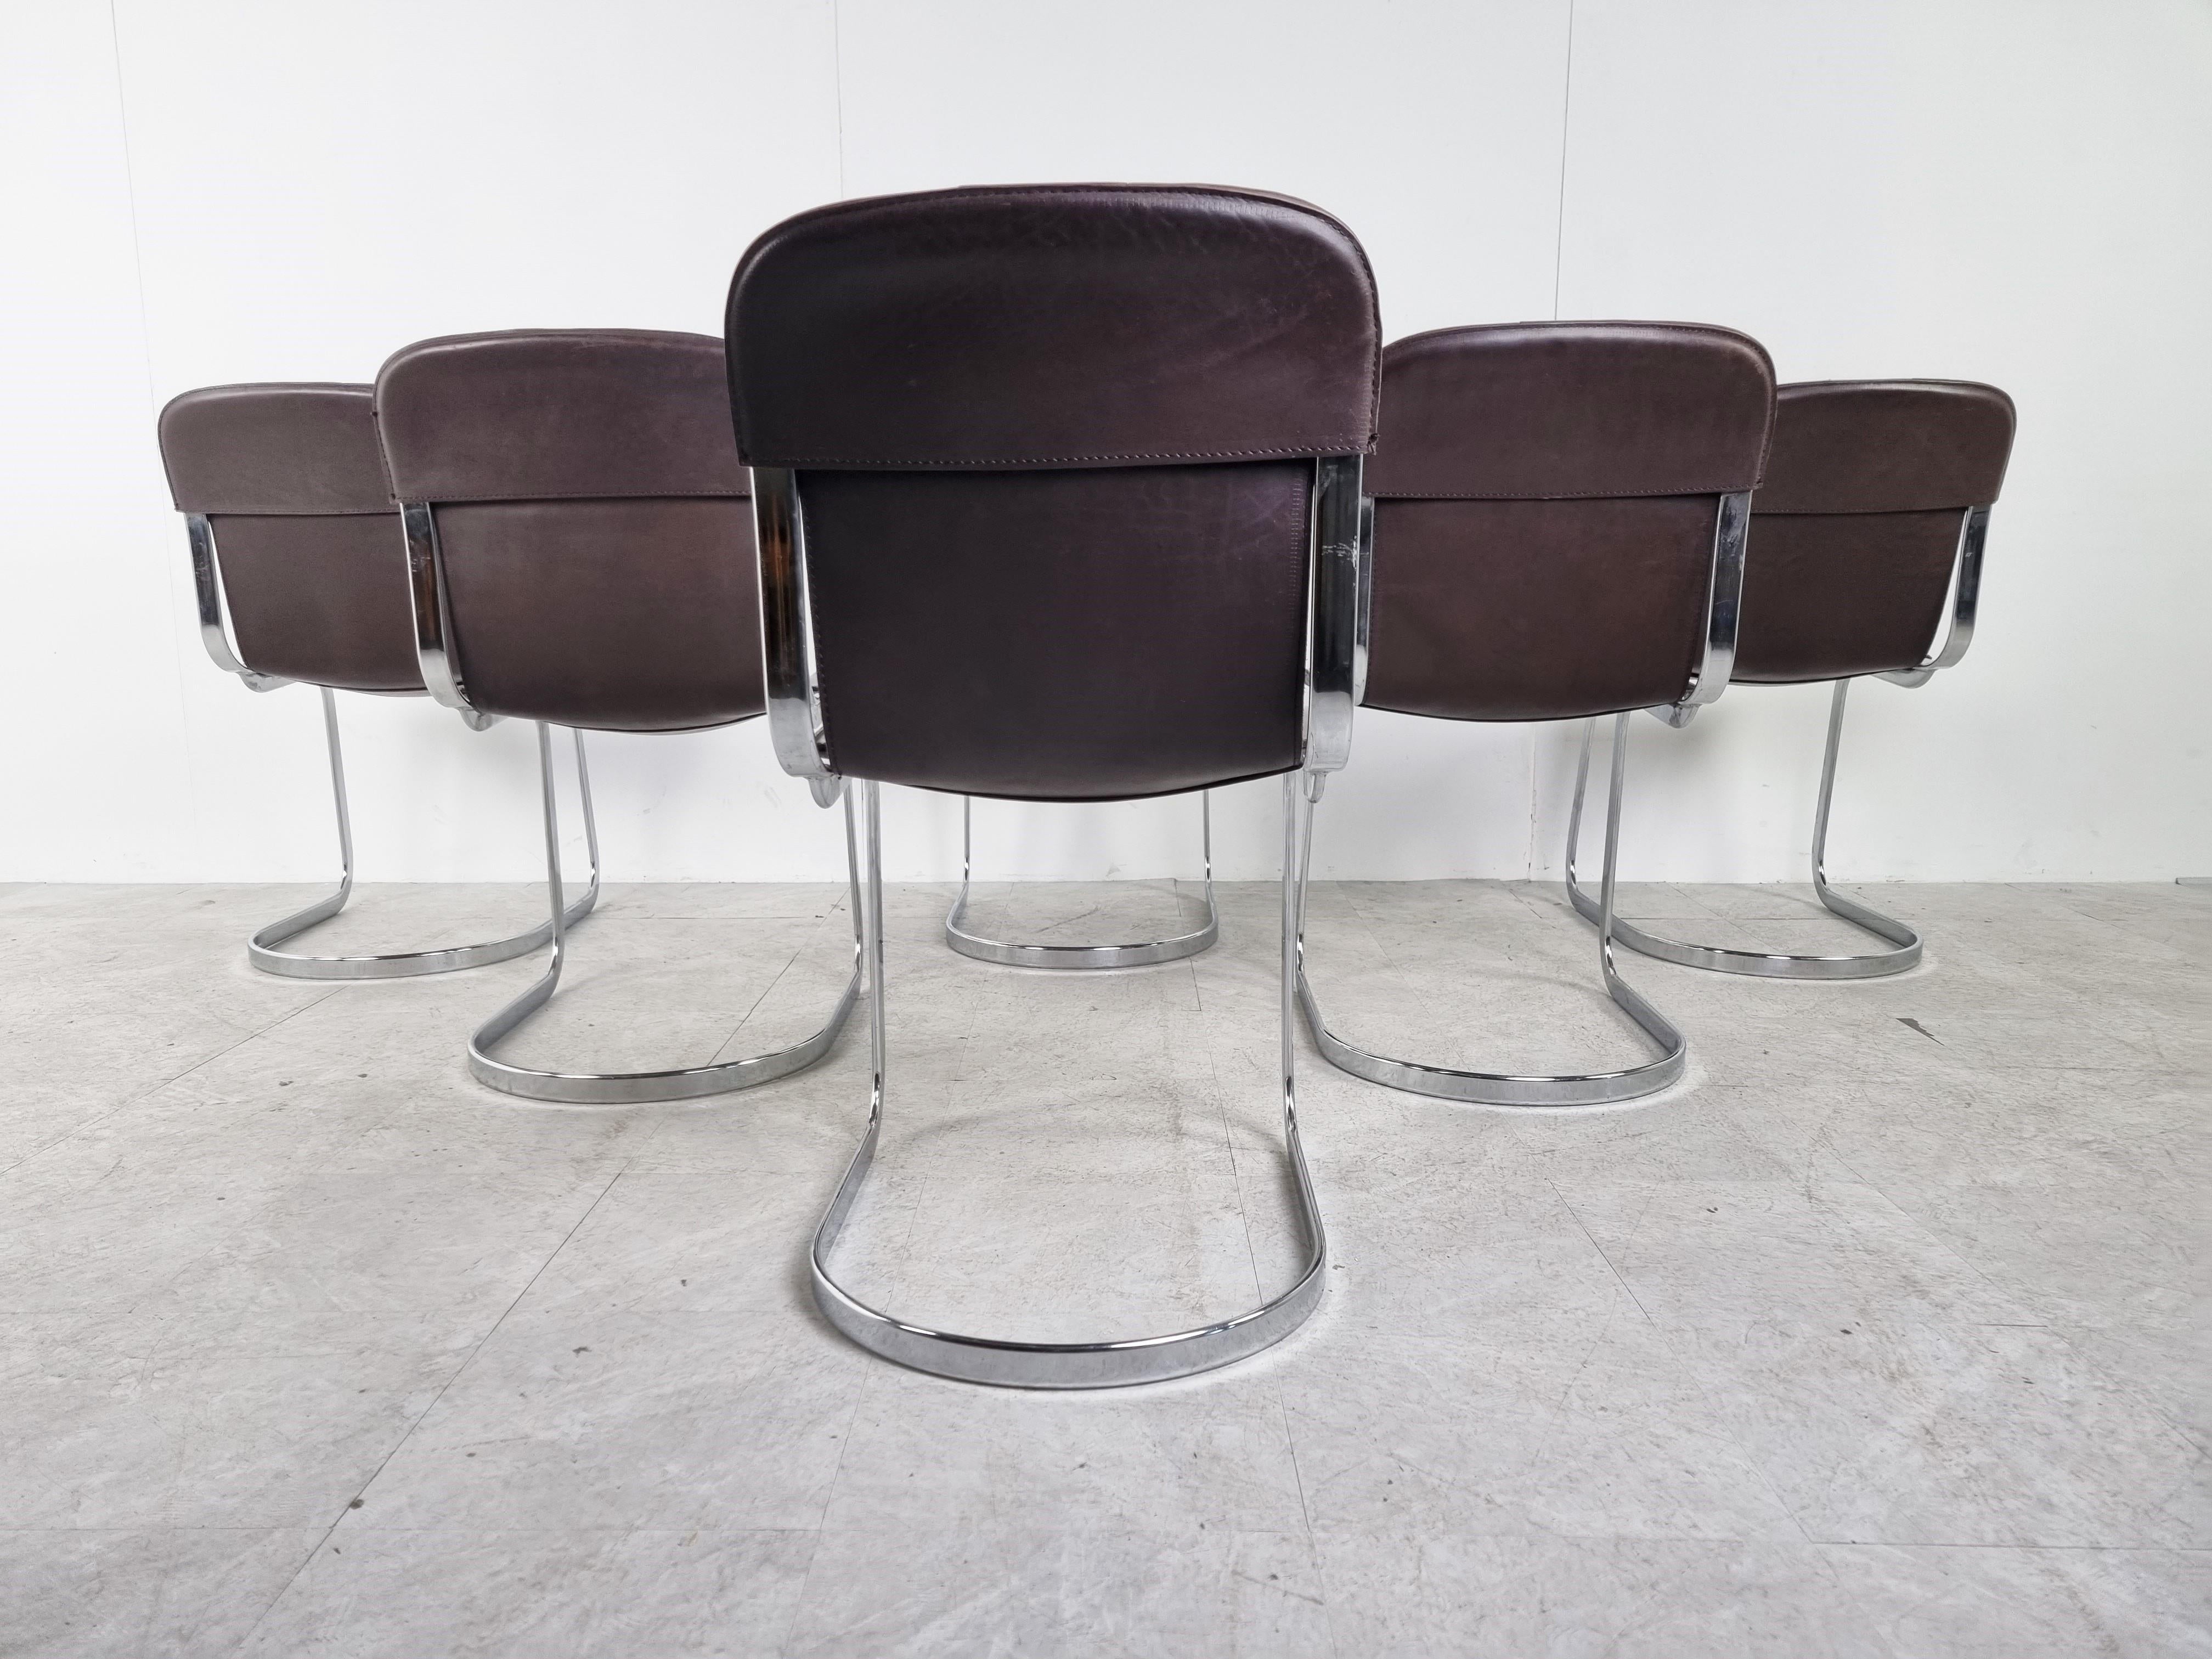 Set of 6 dining chairs designed by Willy Rizzo for Cidue.

The chairs have a beautifully shaped chrome frame and come with the original dark brown leather seats.

Good condition.

The chairs still look up to date in modern day interiors and